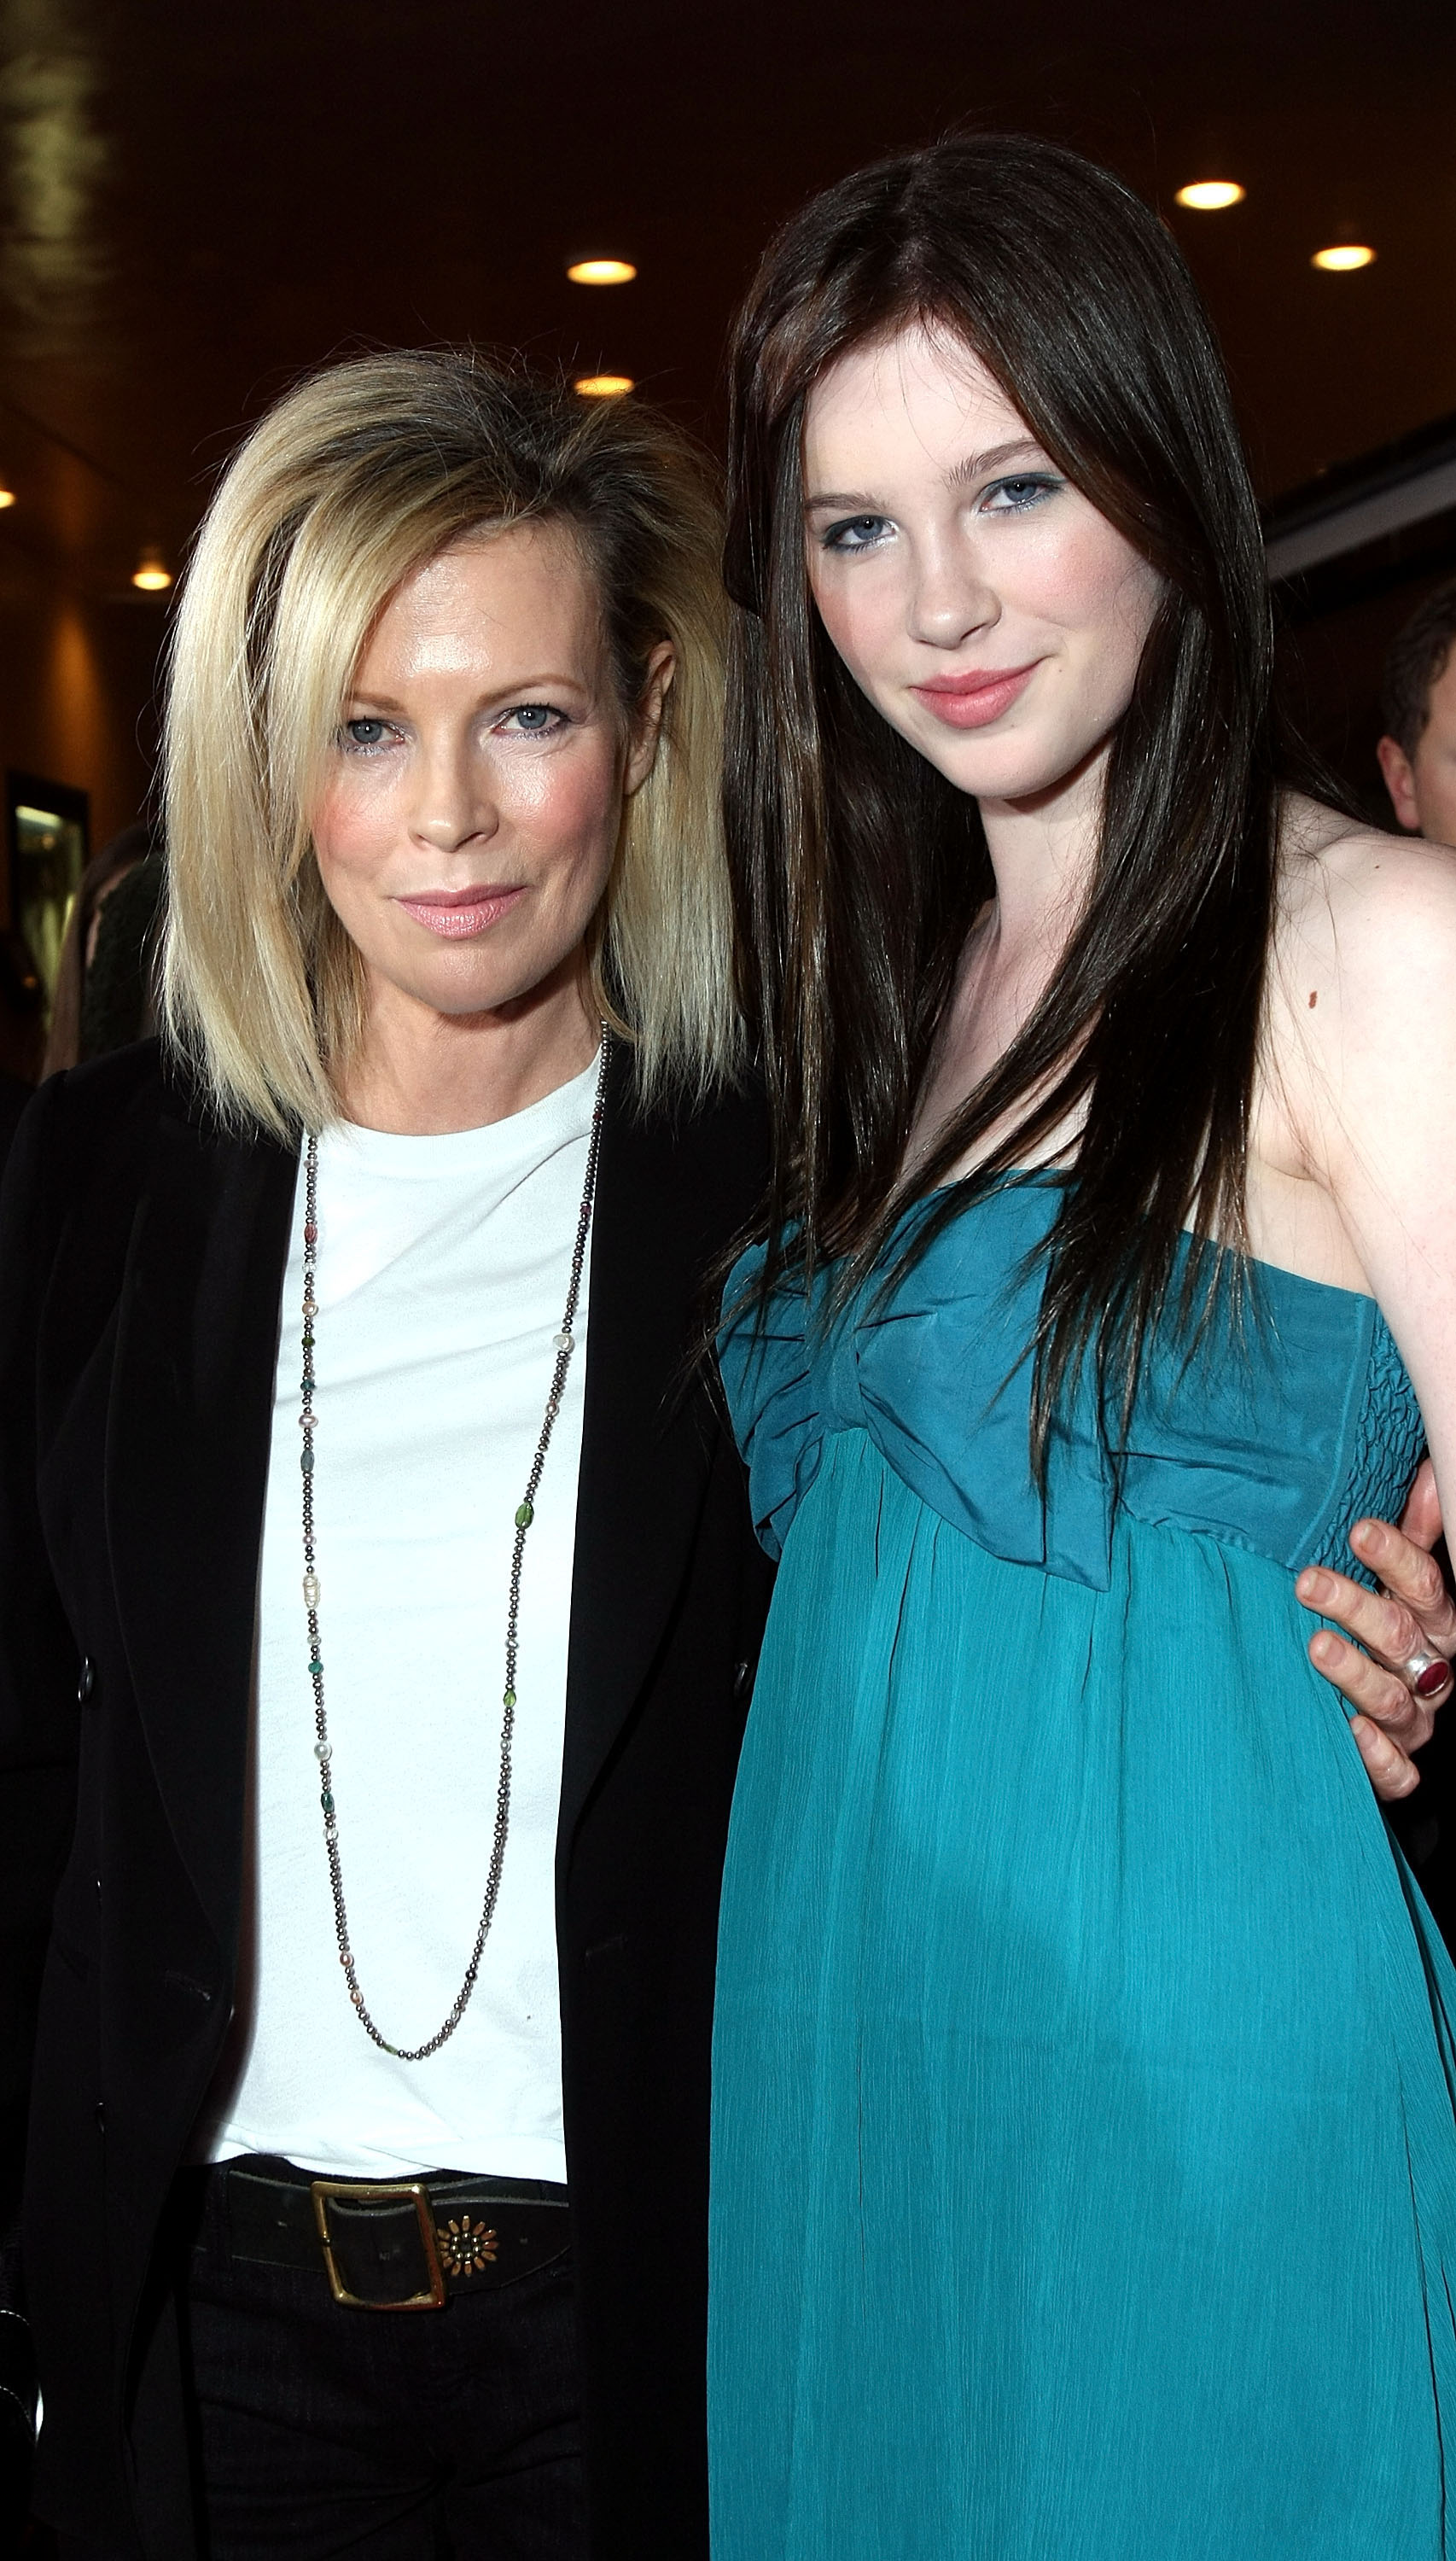 Kim Basinger and Ireland Baldwin in Westwood, California on November 17, 2008 | Source: Getty Images